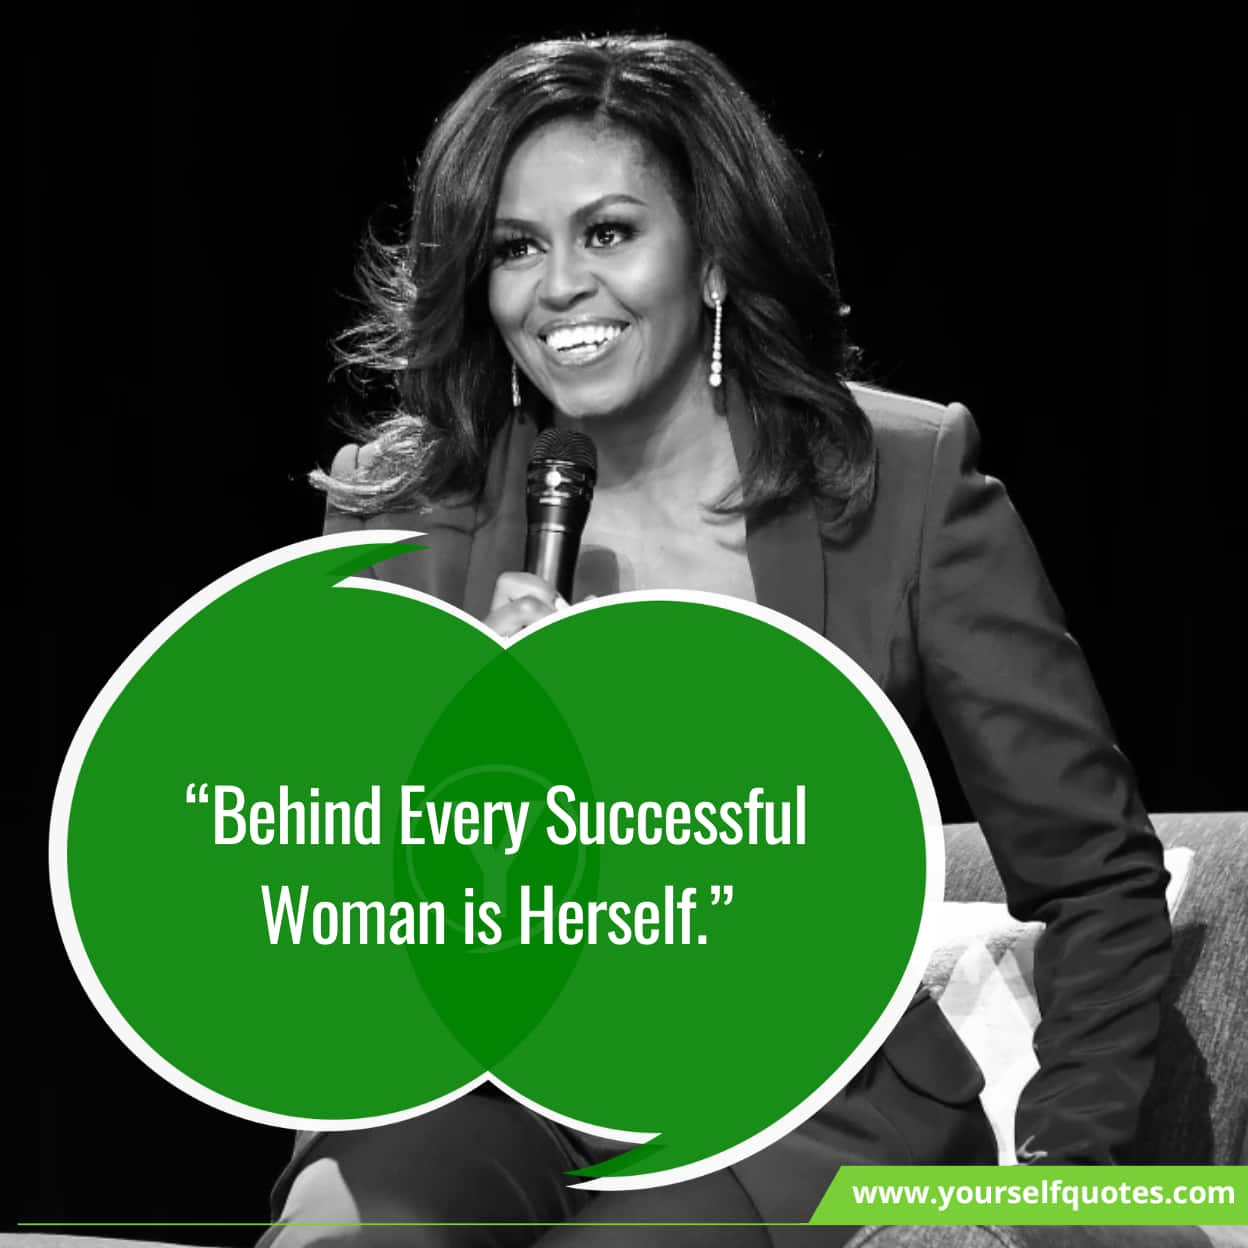 Inspiring Strong Quotes Women For Success